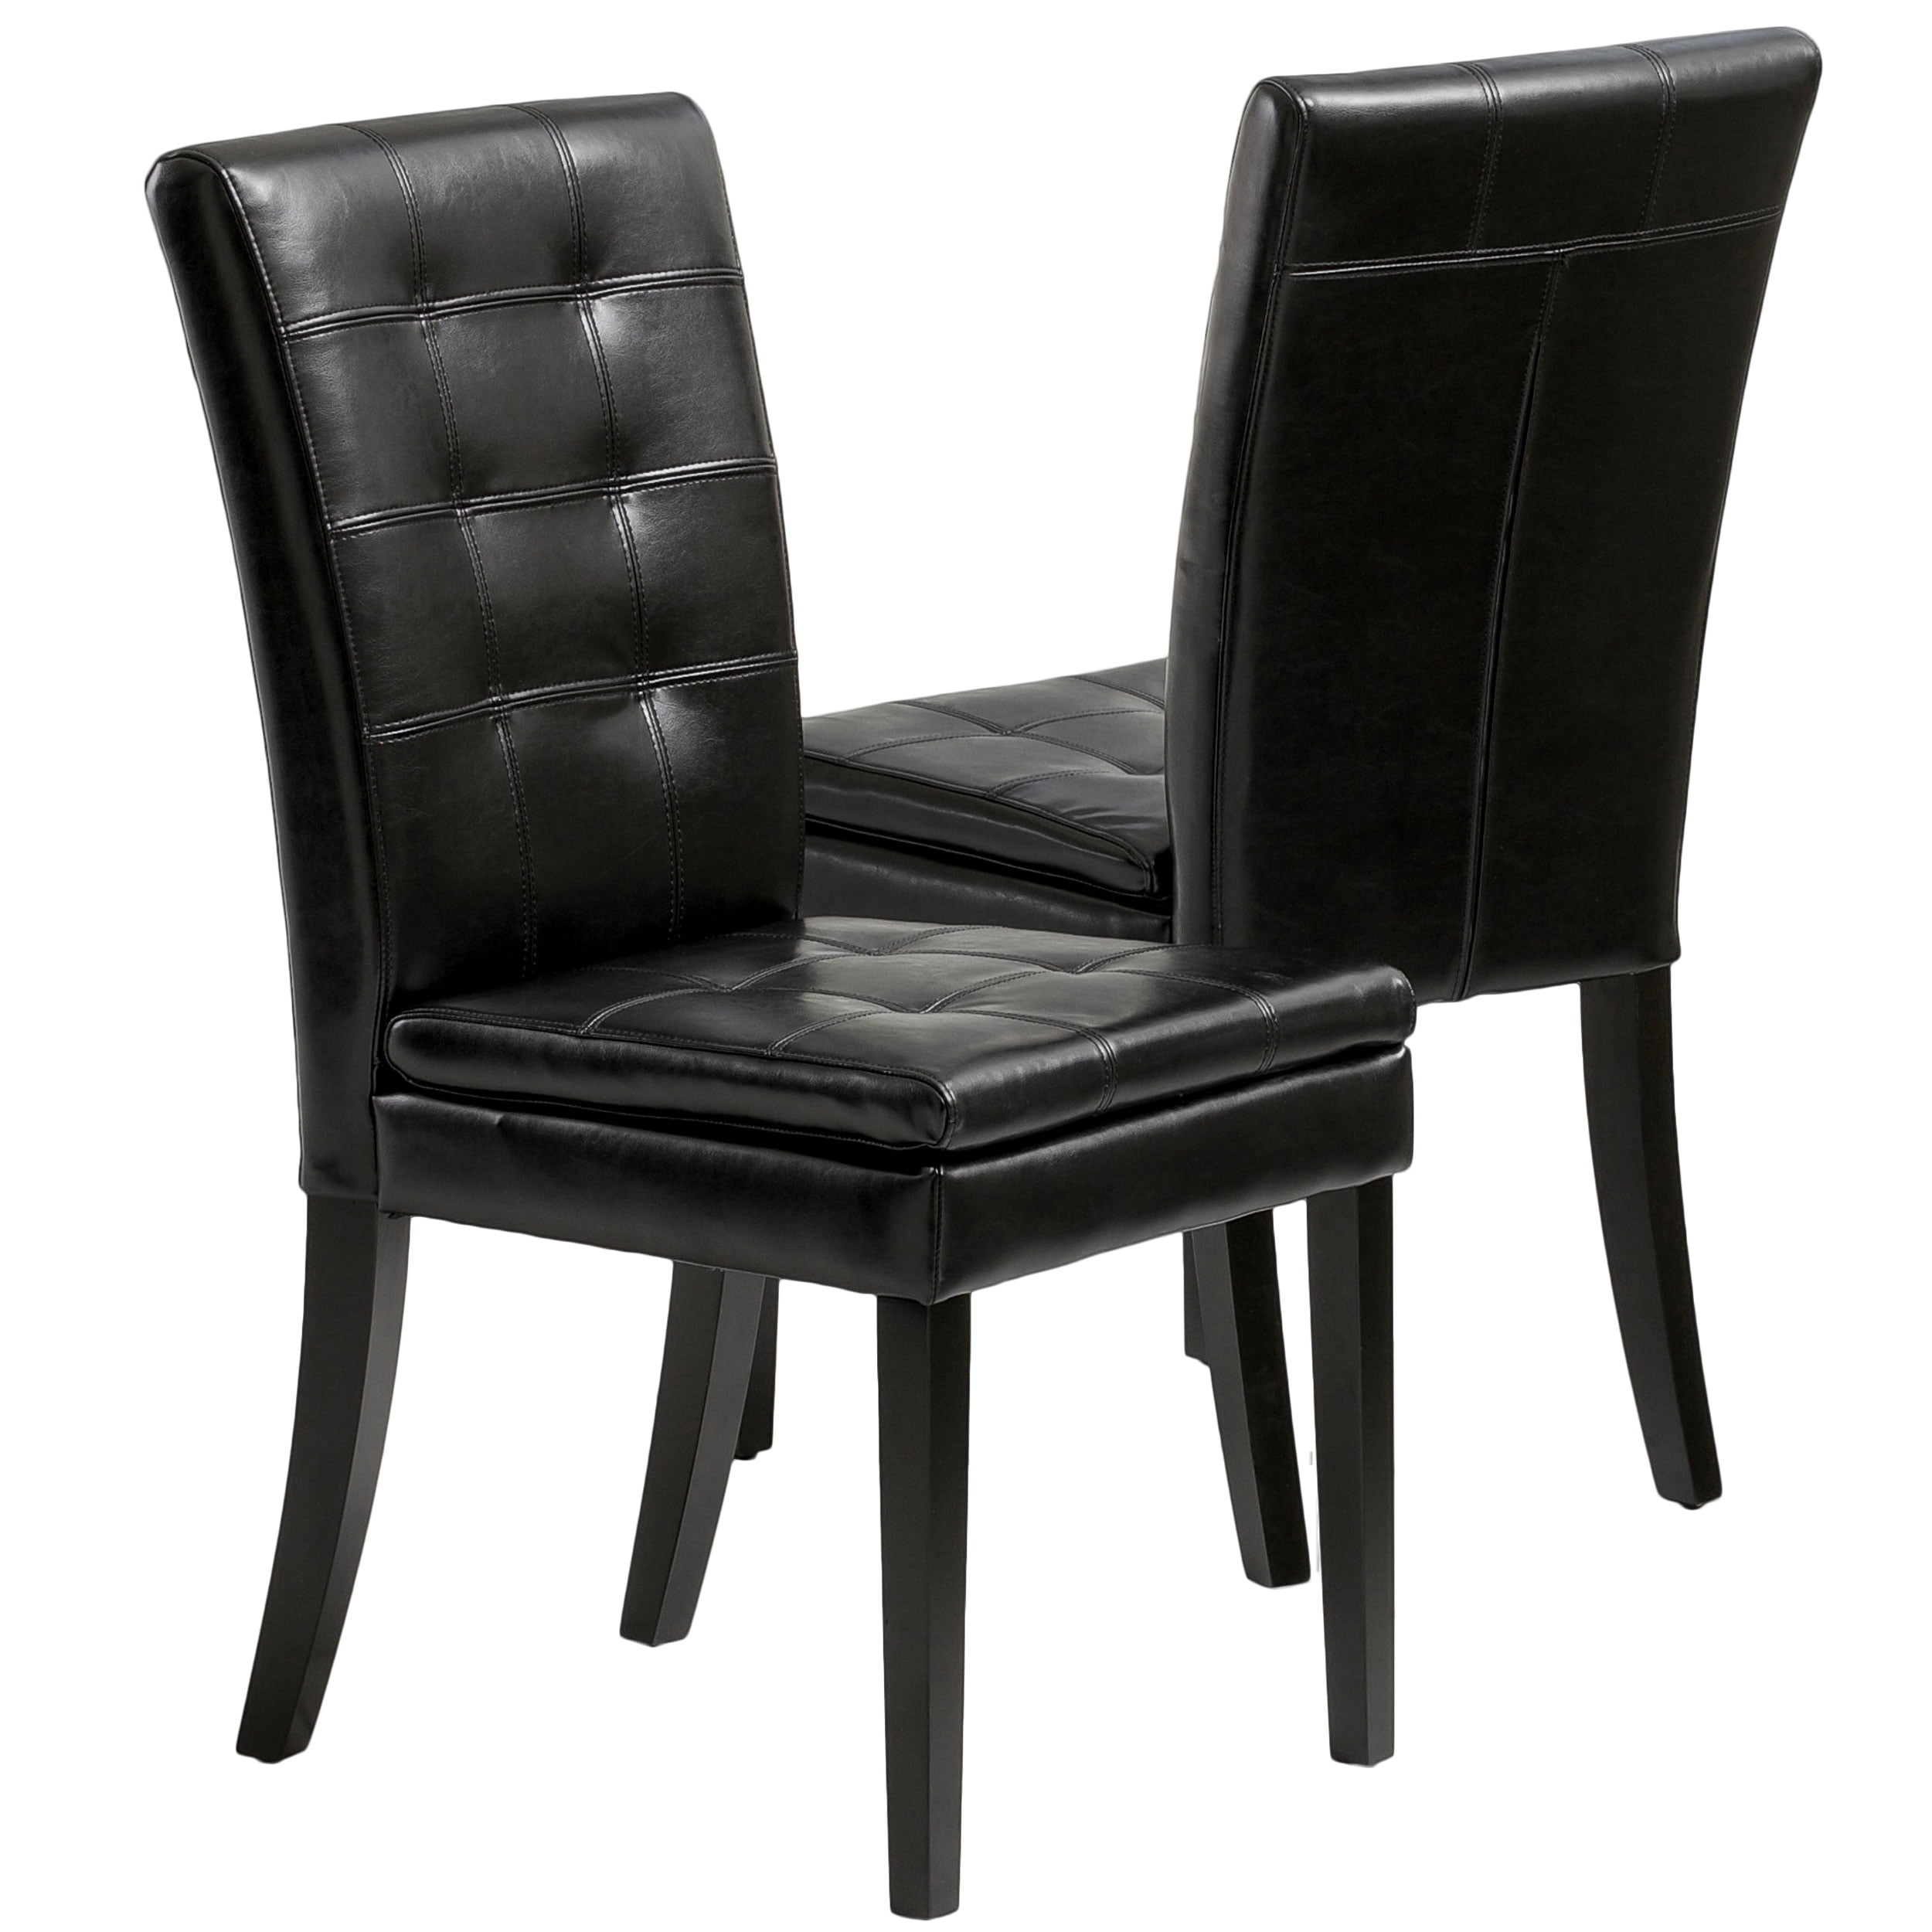 Mayme Parsons Dining Chair Set Of 2, Black Leather Parsons Dining Chairs